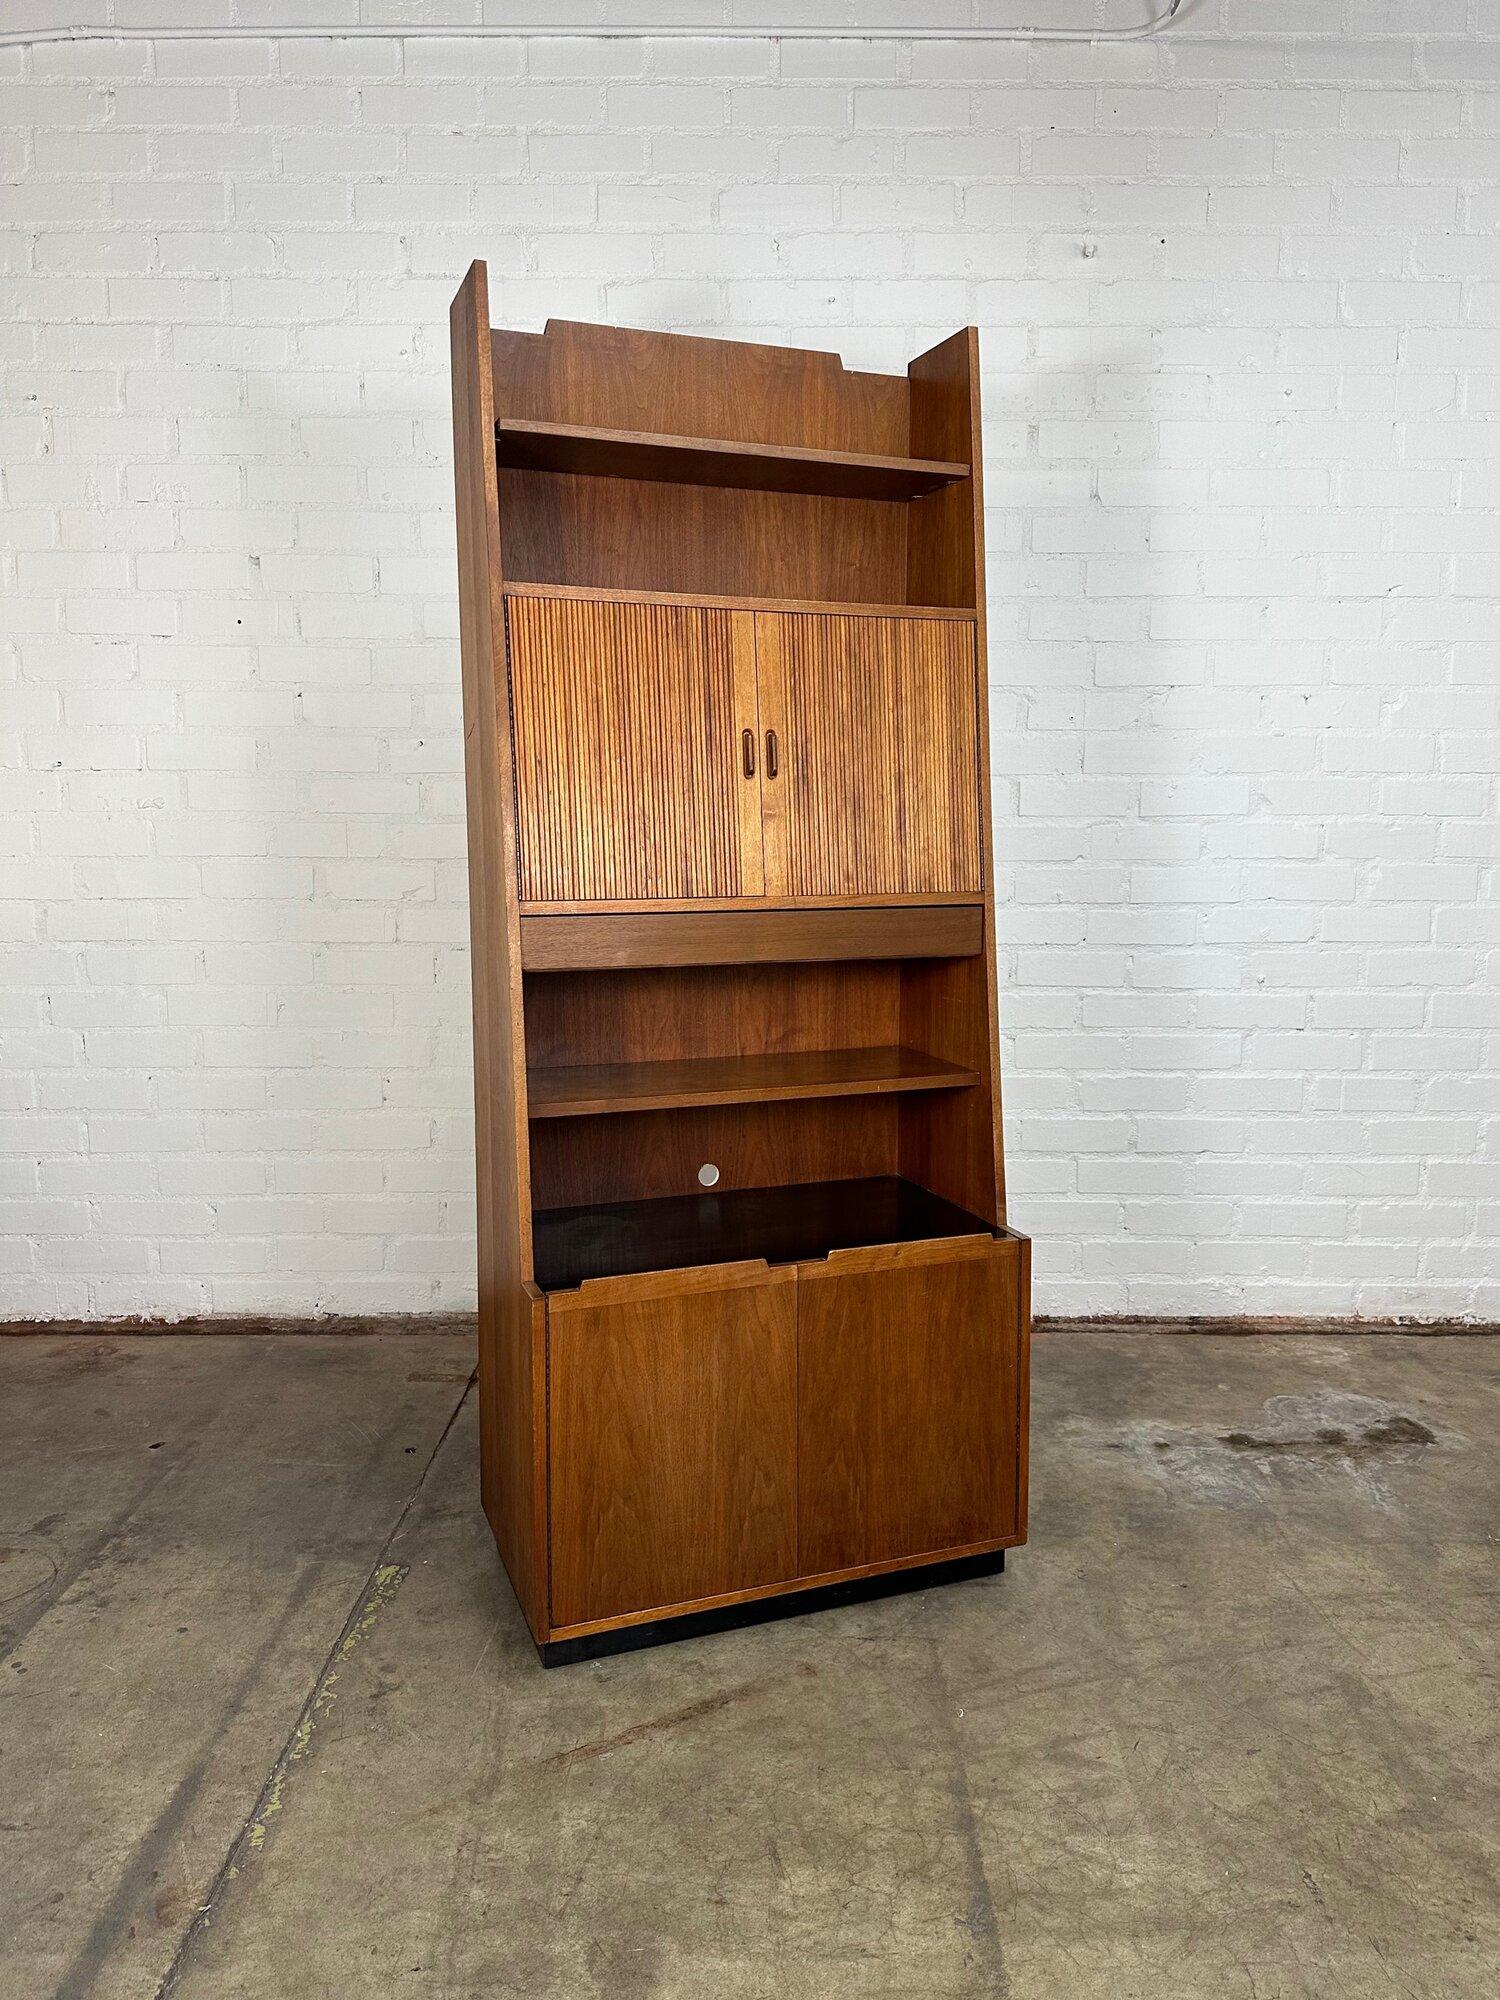 Dimensions: W32 D18 H80

Midcentury bookcase very reminiscent of Dillingham. The bookcase features two doors that appear to be Tambour but only give the illusion. The item is structurally sound and sturdy with a durable black laquer surface.